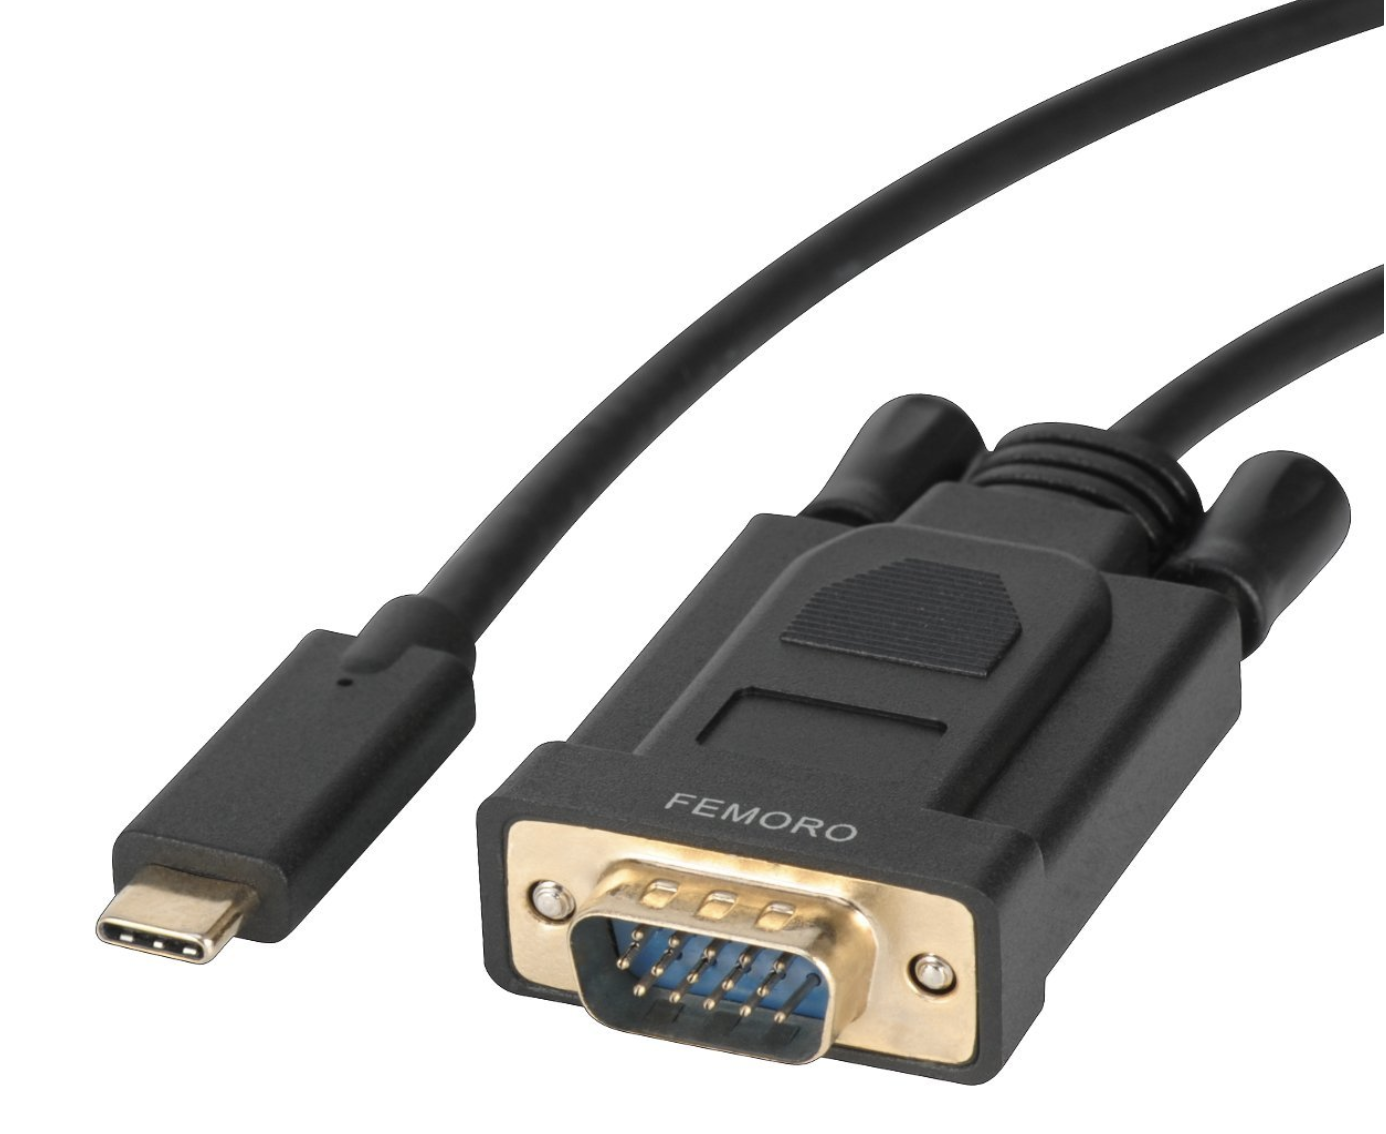 How To Connect 2 Monitors Laptop Hdmi And Vga Best Image